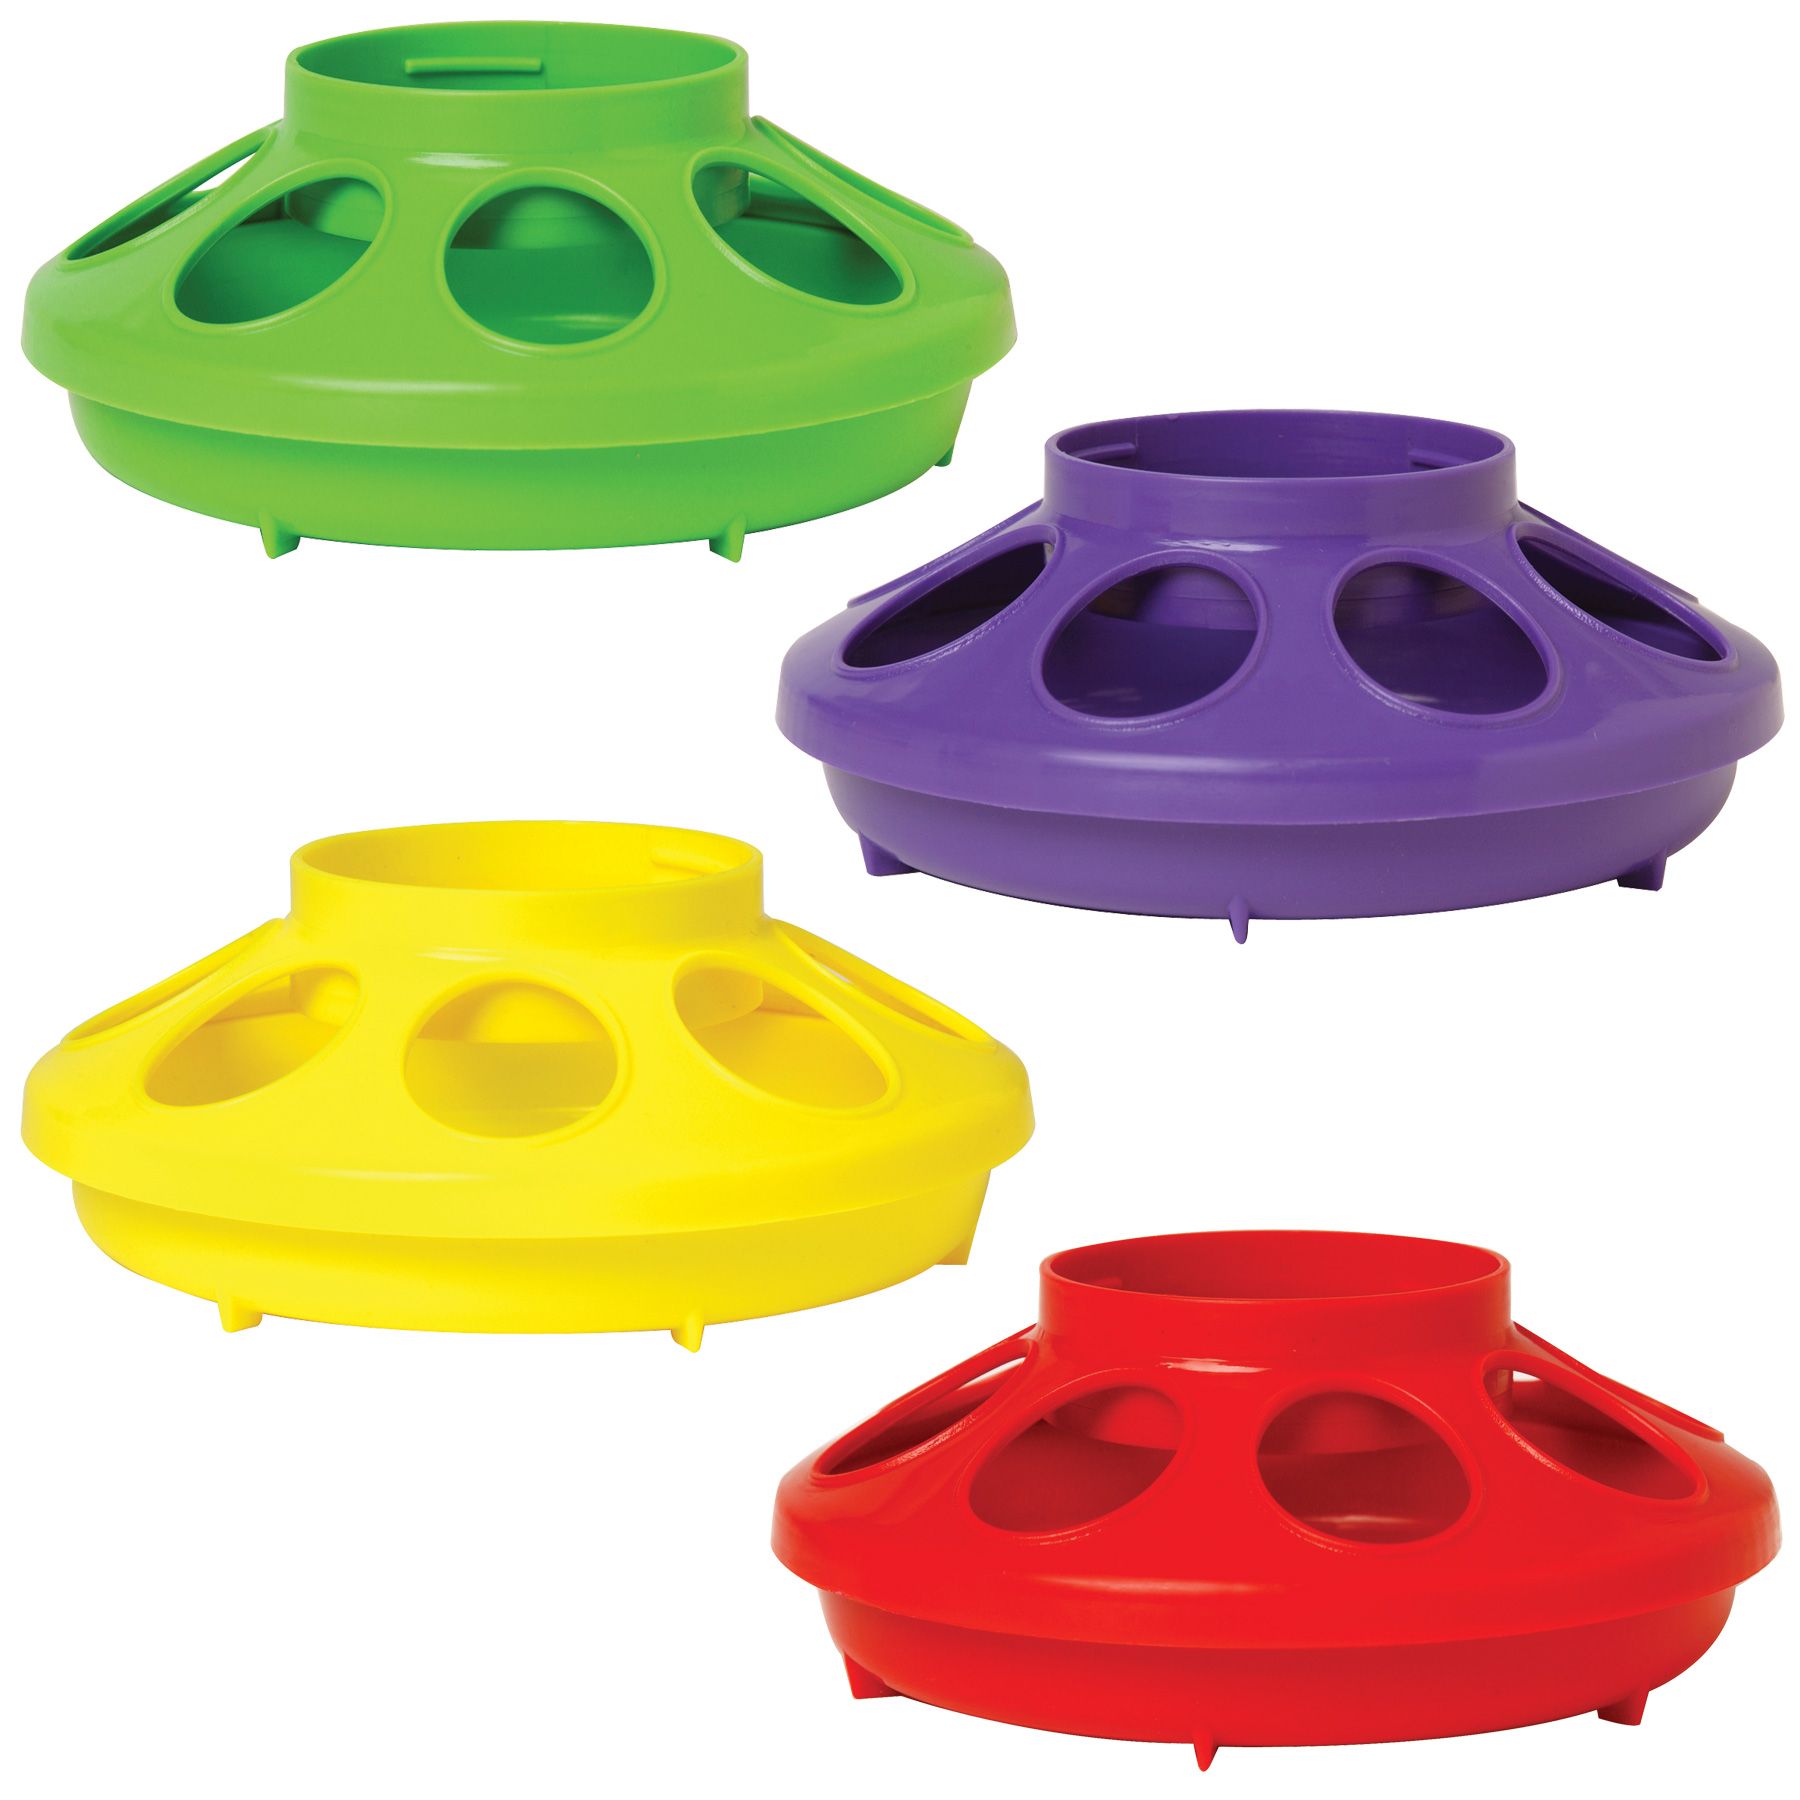 Little Giant Plastic Flip-Top Poultry Ground Feeder Yellow